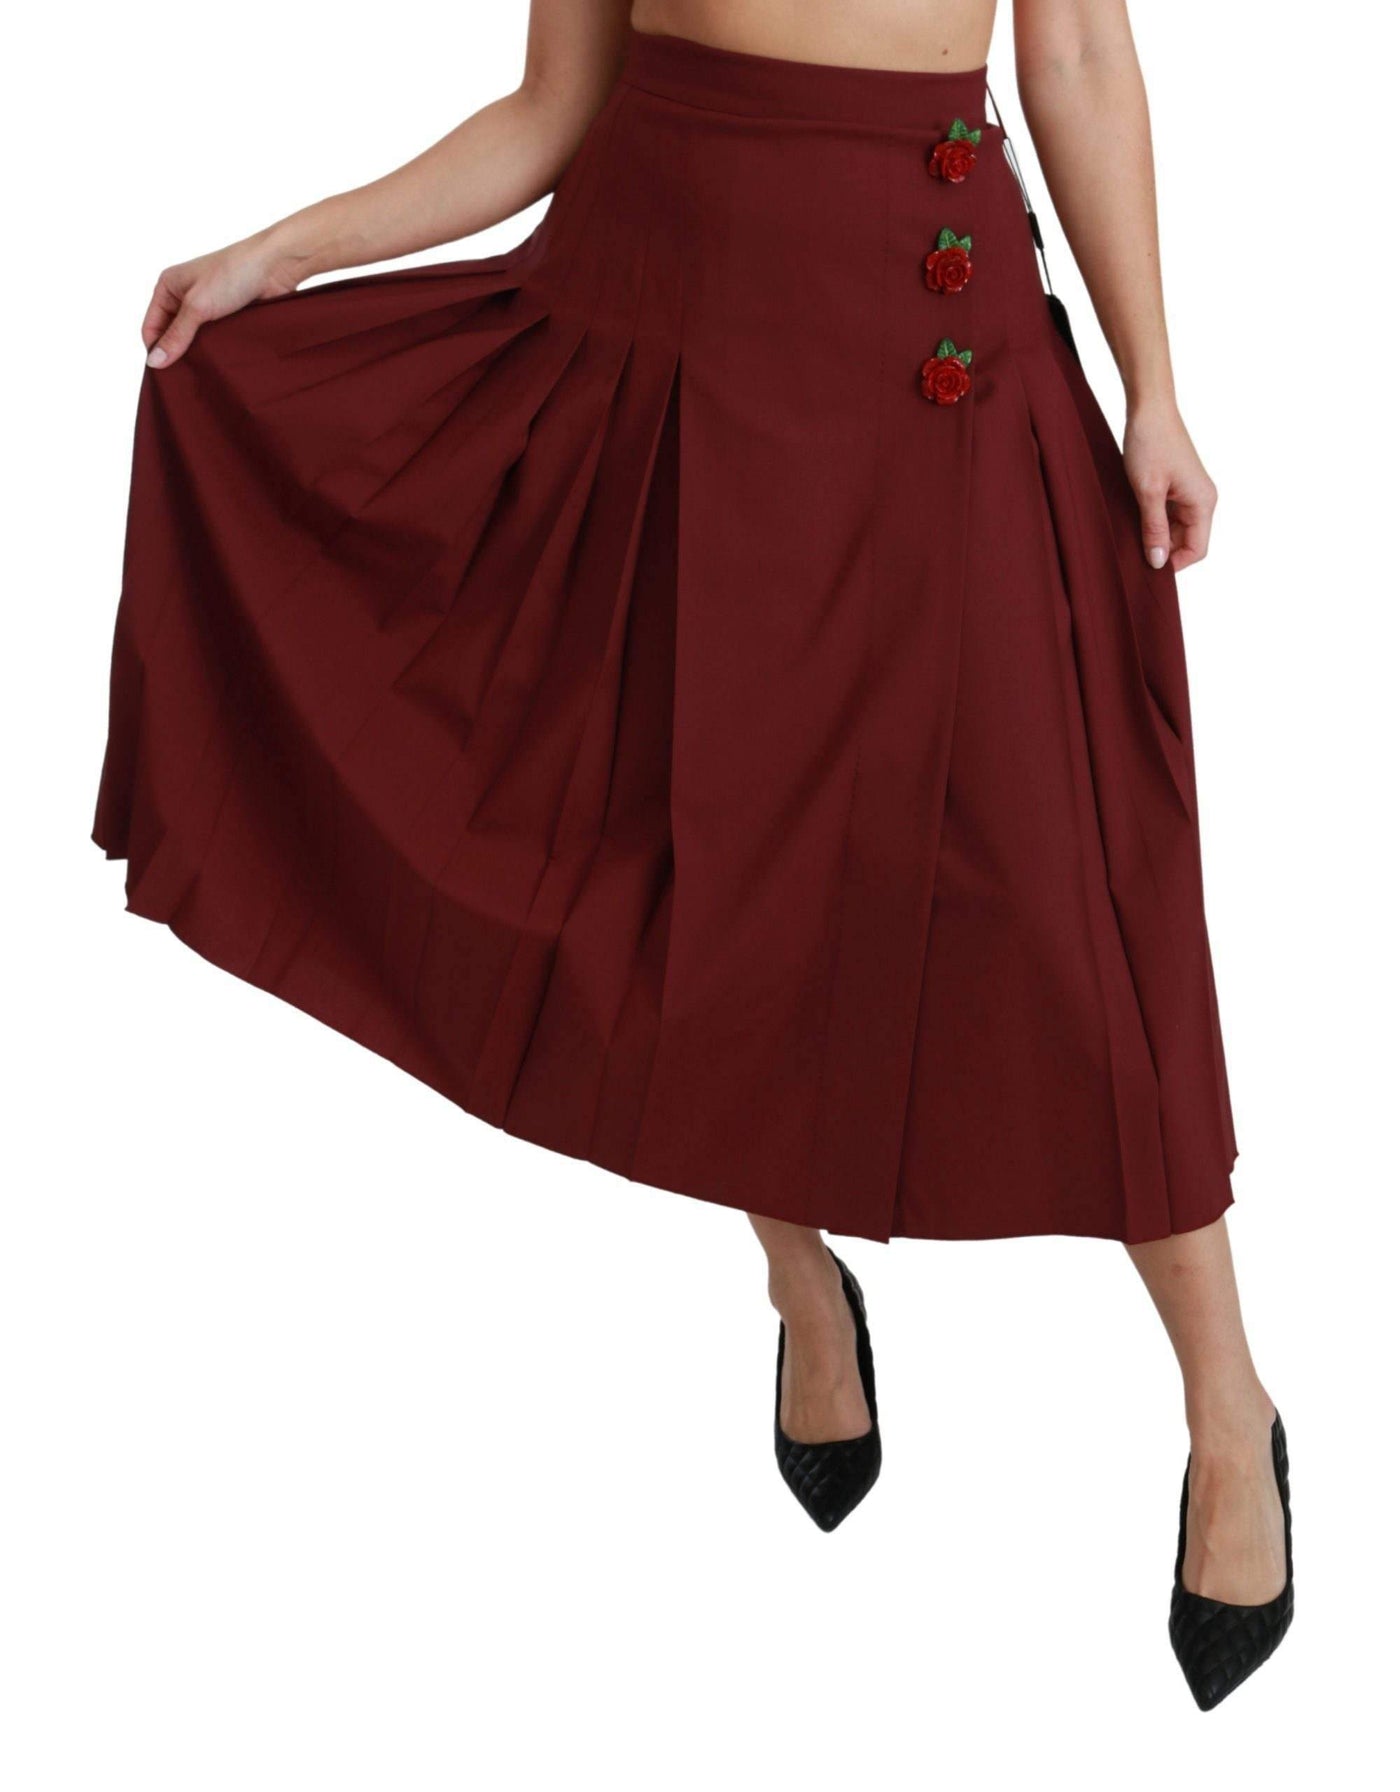 Dolce & Gabbana Red High Waist Pleated Maxi Wool Skirt #women, Brand_Dolce & Gabbana, Catch, Dolce & Gabbana, feed-agegroup-adult, feed-color-red, feed-gender-female, feed-size-IT38|XS, feed-size-IT40|S, feed-size-IT46|XL, Gender_Women, IT38|XS, IT40|S, IT46|XL, Kogan, Red, Skirts - Women - Clothing, Women - New Arrivals at SEYMAYKA